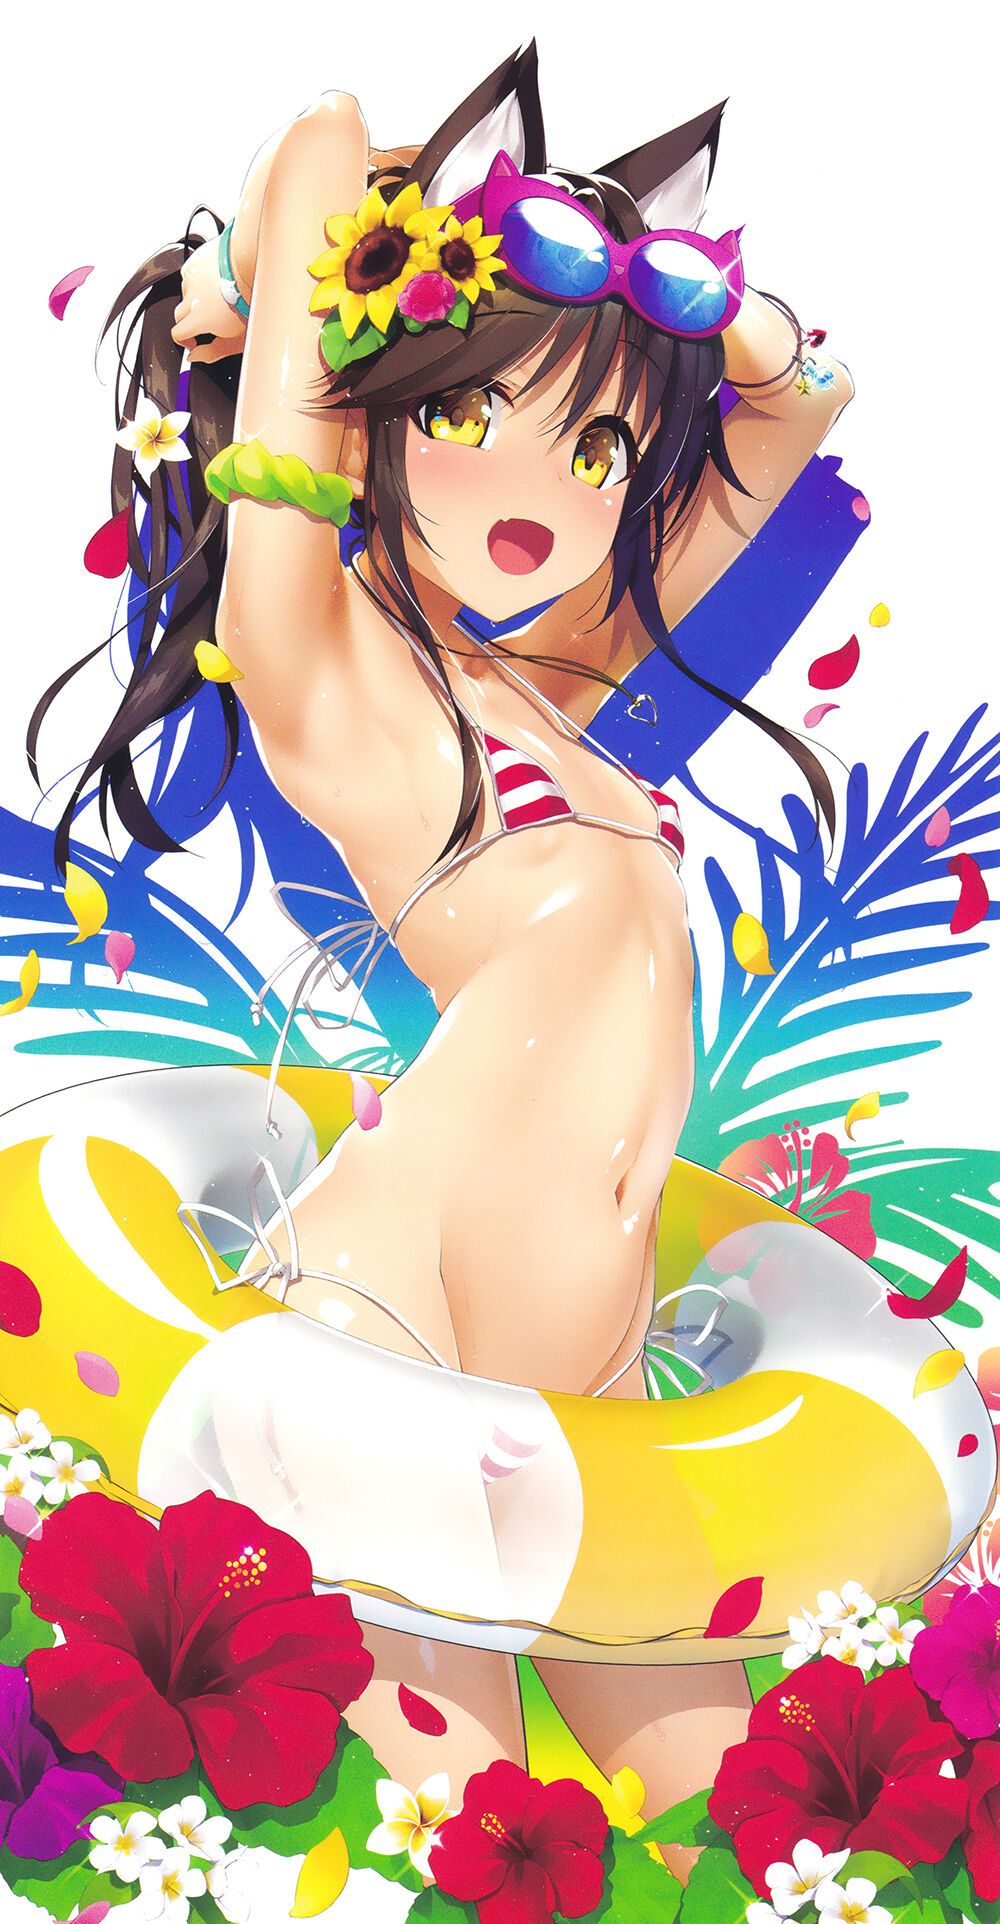 Secondary image of a beautiful girl's extreme swimsuit 41